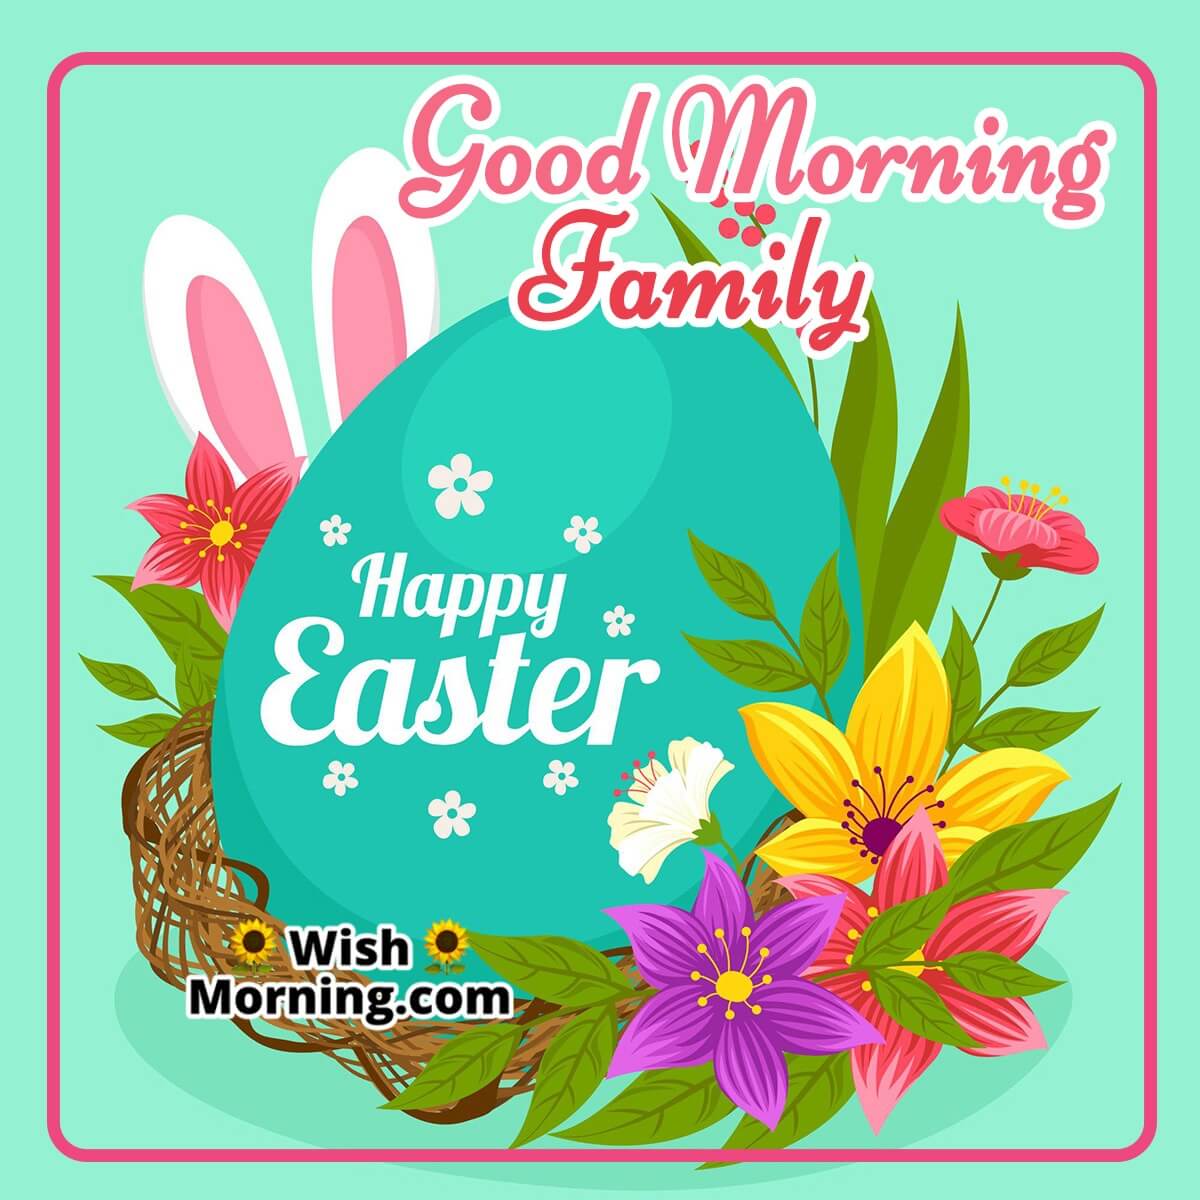 Good Morning Family Happy Easter